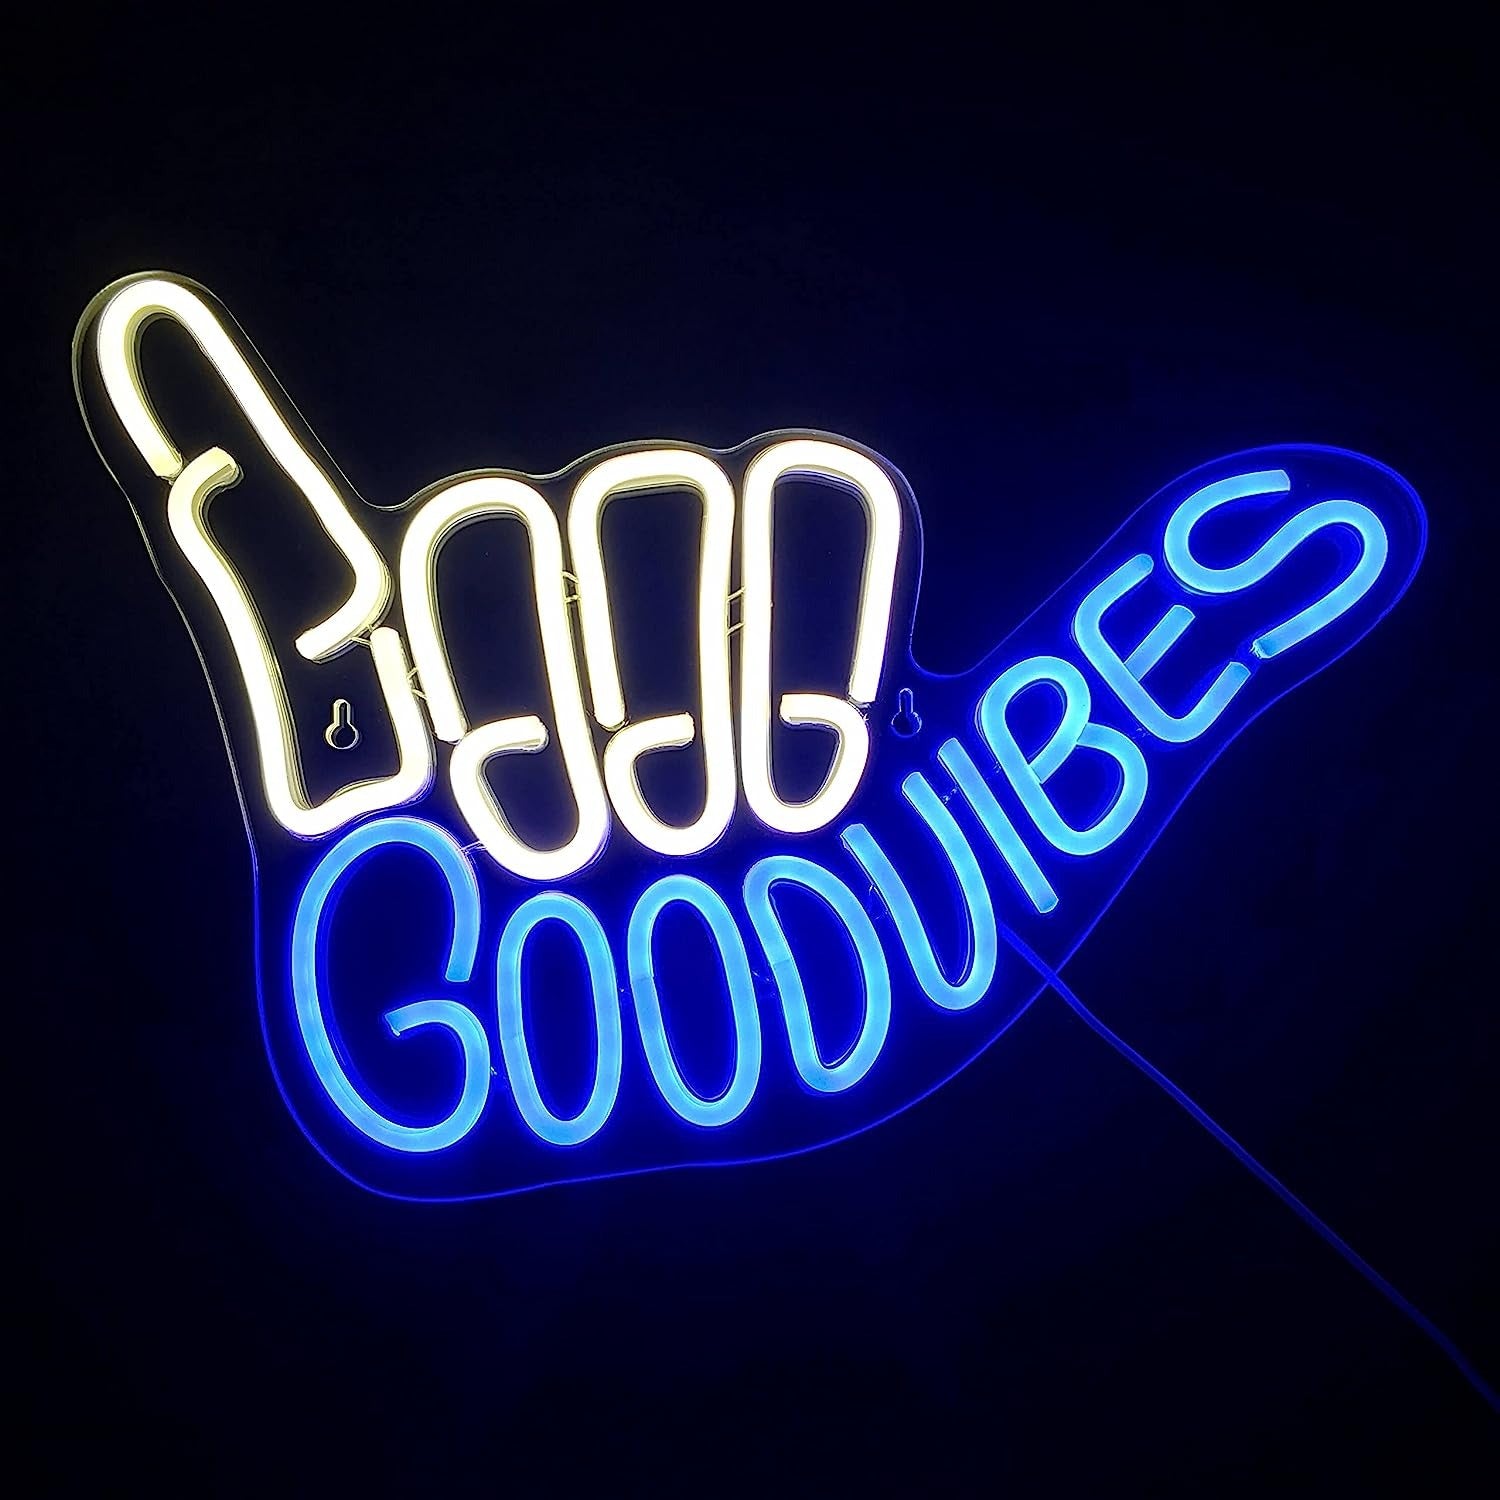 “Good Vibes Only” neon sign to enhance the visual impact 